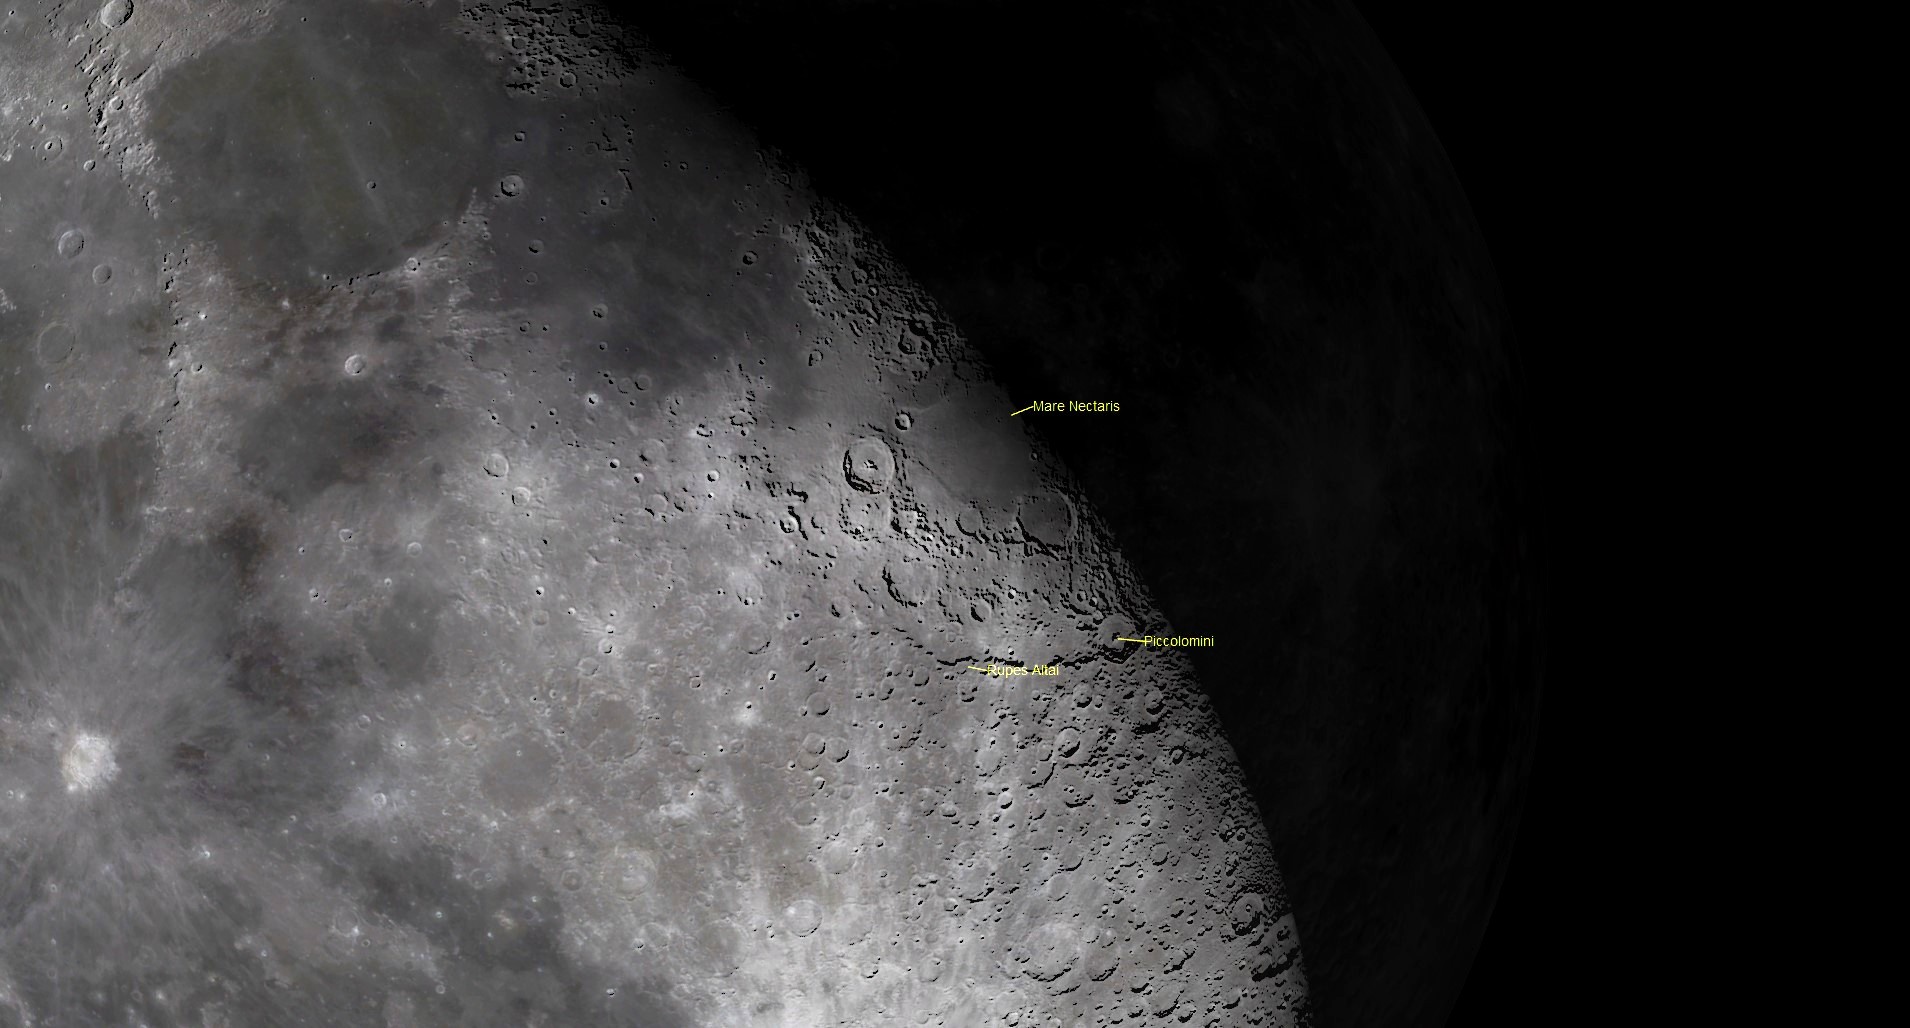 a closeup view of the moon shows craters, indicated with labels